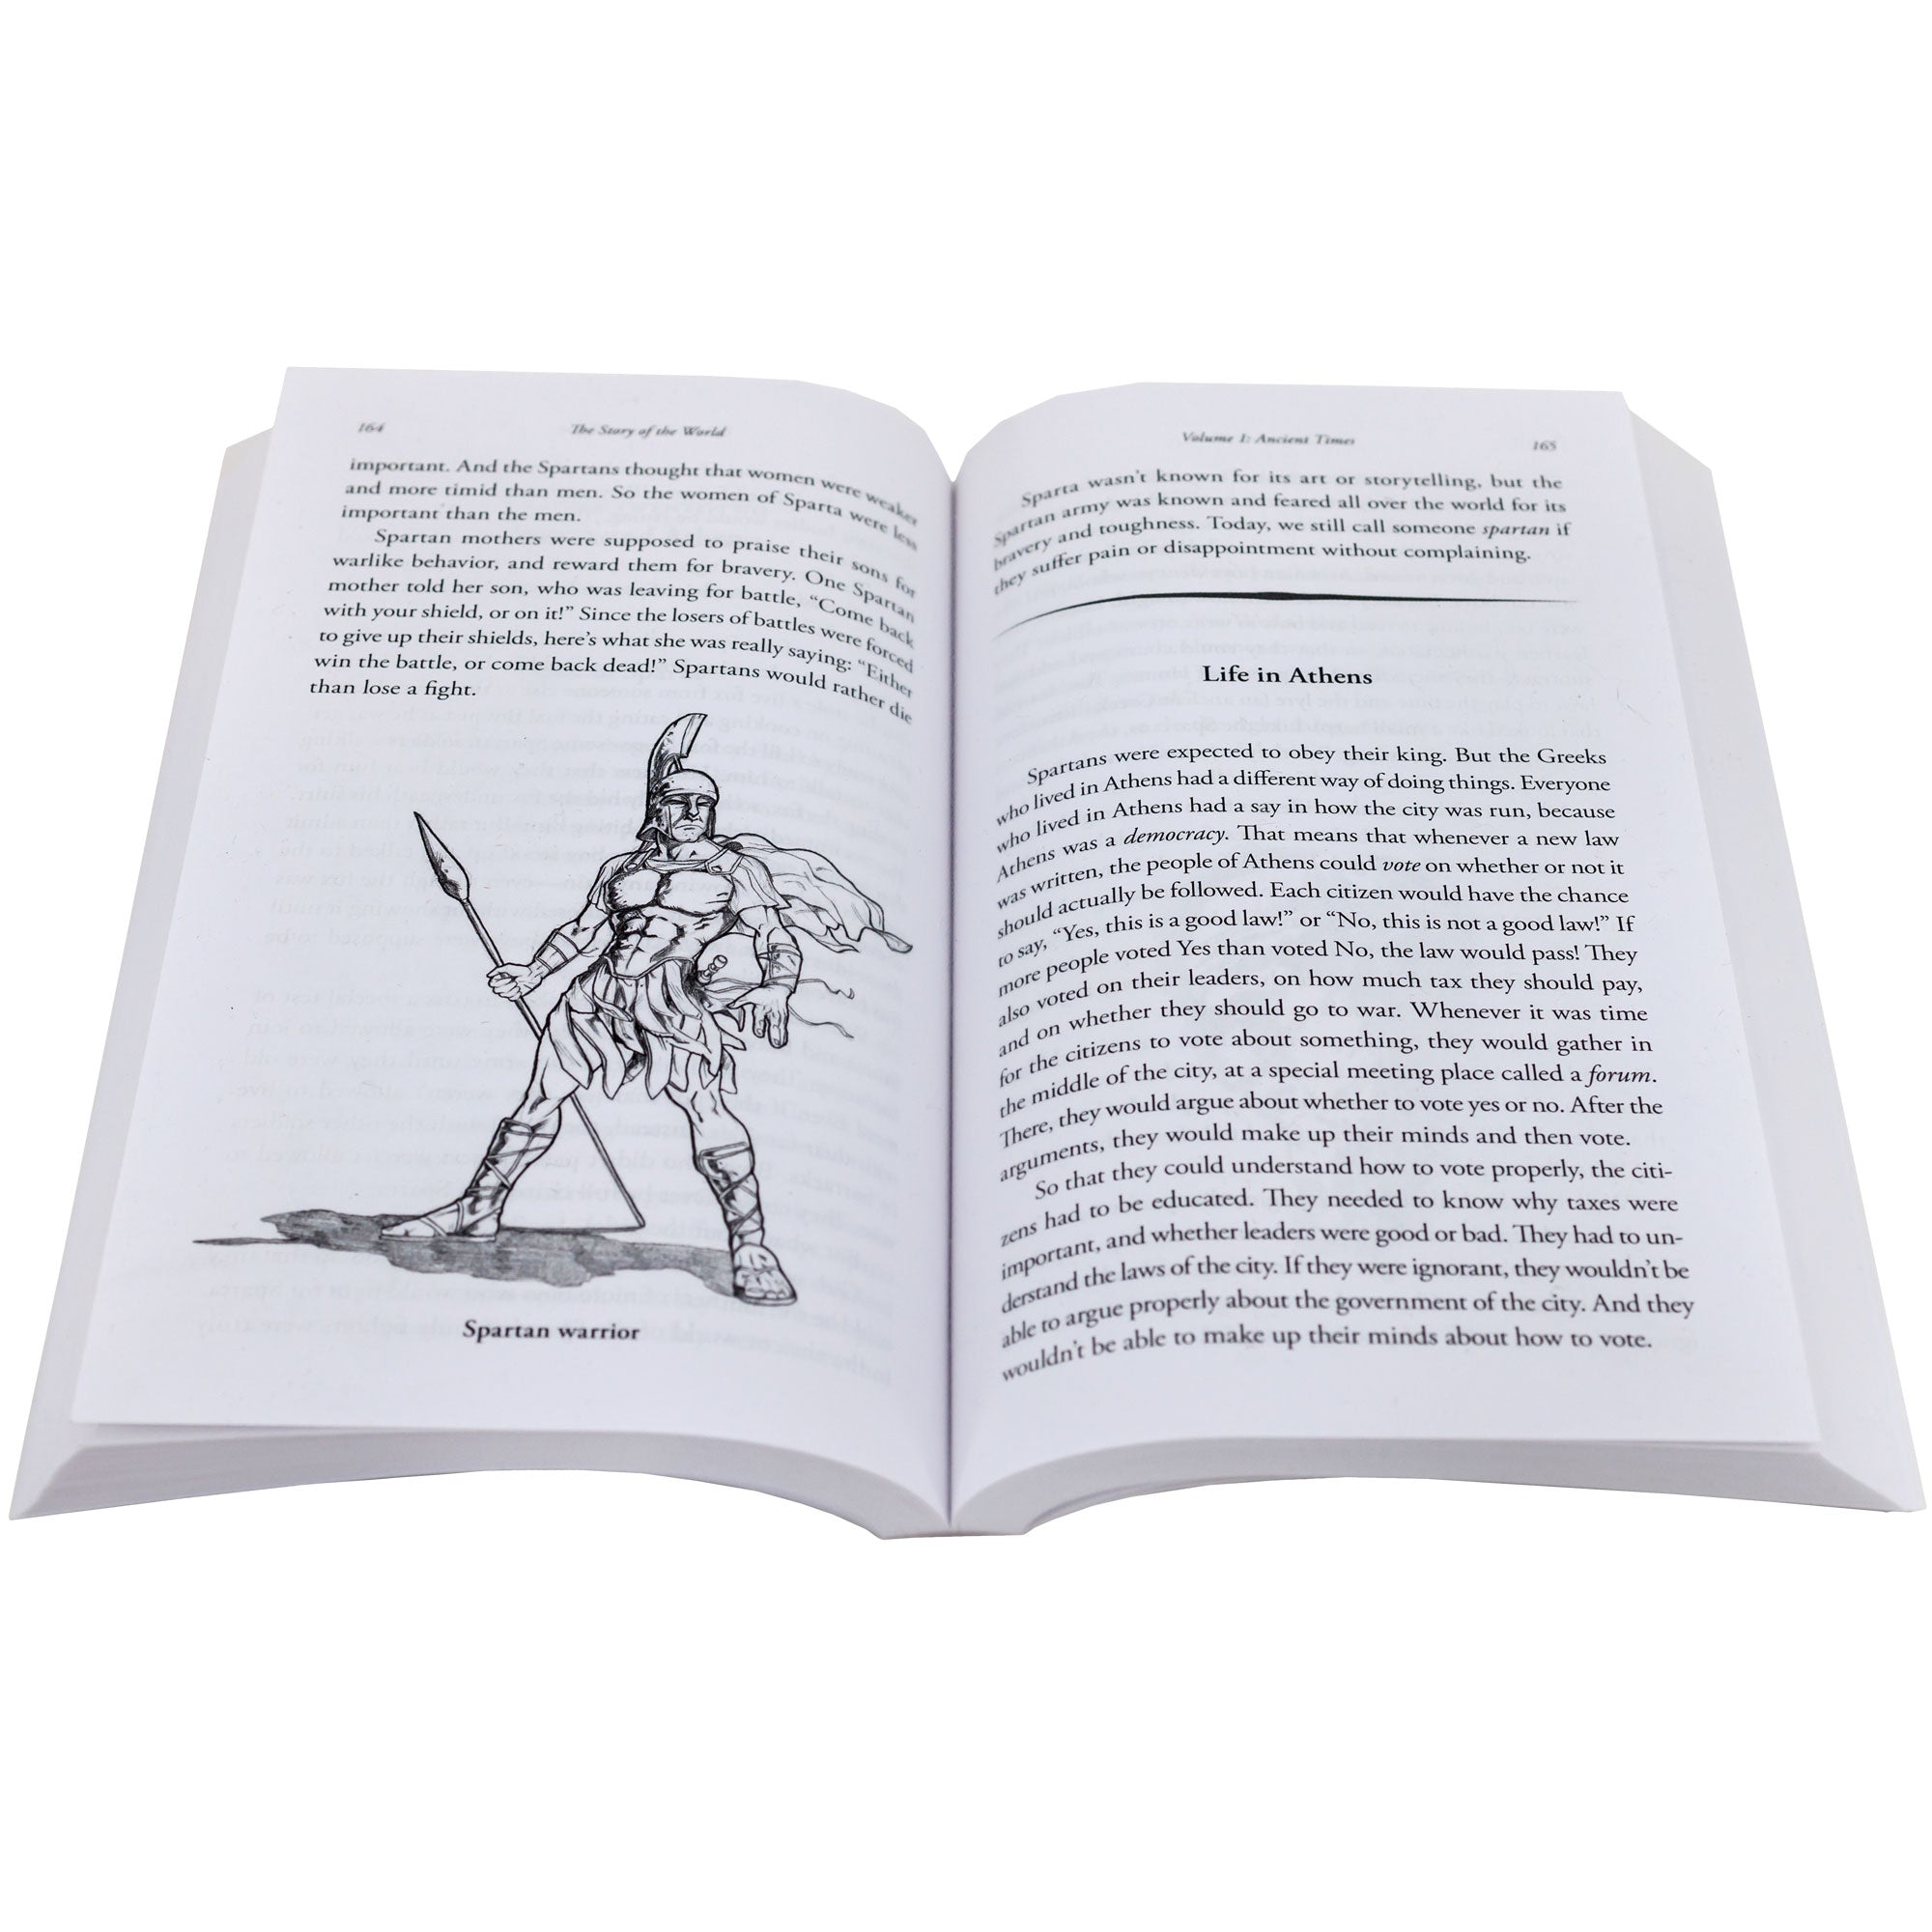 The Story of the World, Volume 1, Ancient Times open to show inside pages. On the left page under some text, is a black and white illustration of a Spartan Warrior. On the right is more text and a title reading “Life in Athens,” then more text.